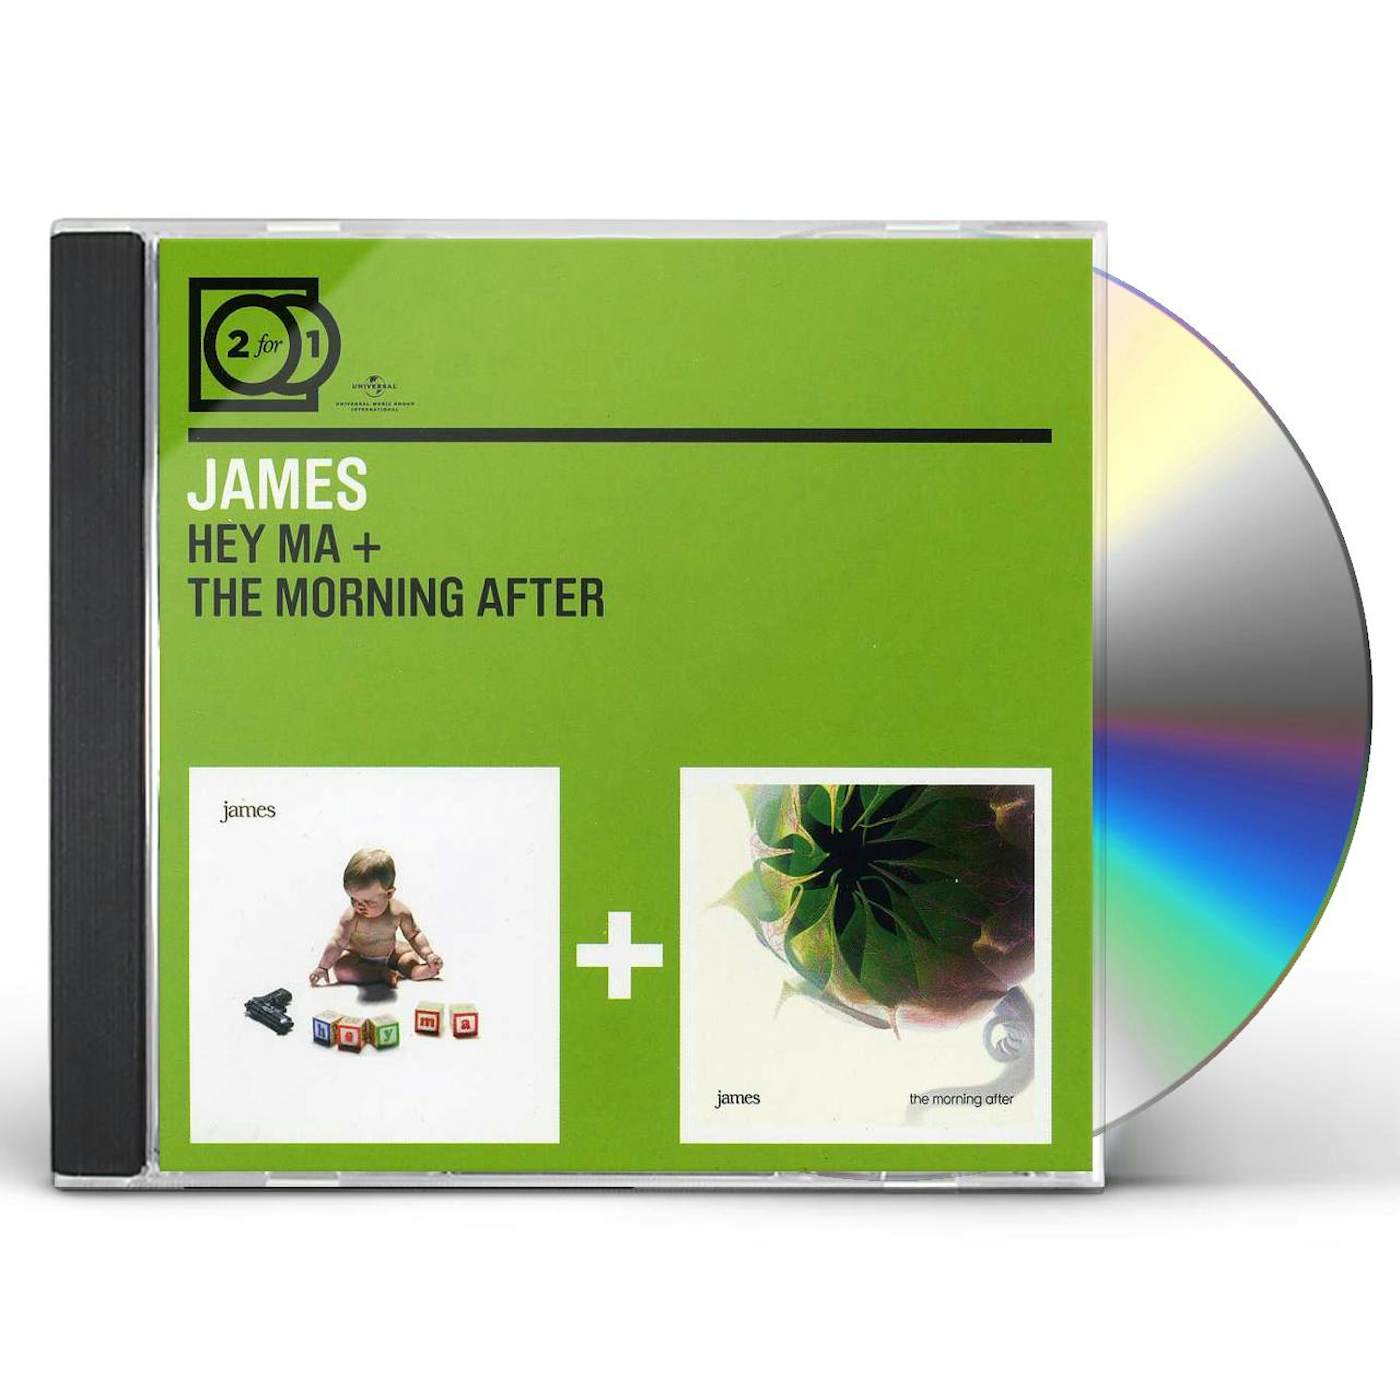 James HEY MA/MORNING AFTER 2 FOR 1 SERIES CD